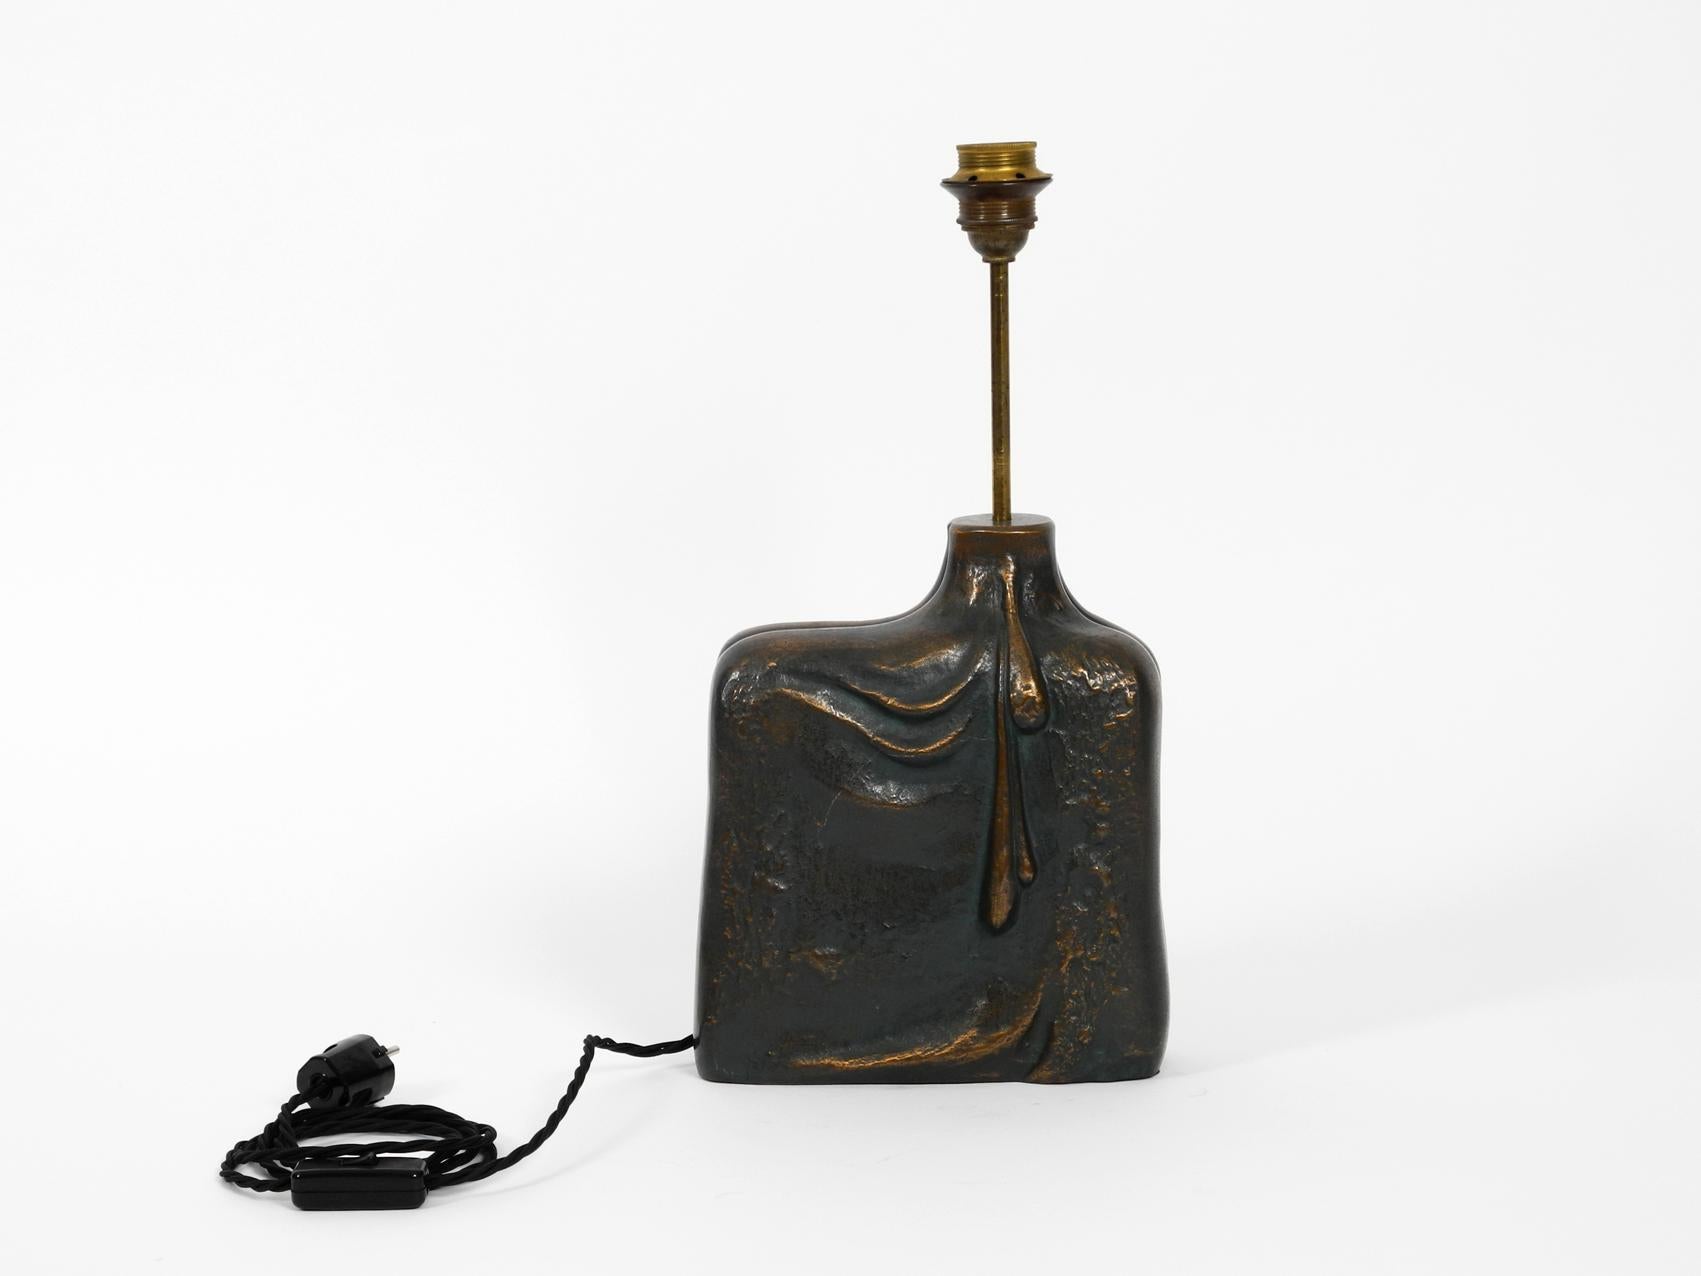 Very elegant table lamp from the 1960s made of bronze. Beautiful very noble organic design with a female figure on the front and water droplets on the back. Lamp base is made entirely of heavy bronze. Weight about 7 kg, although it is hollow